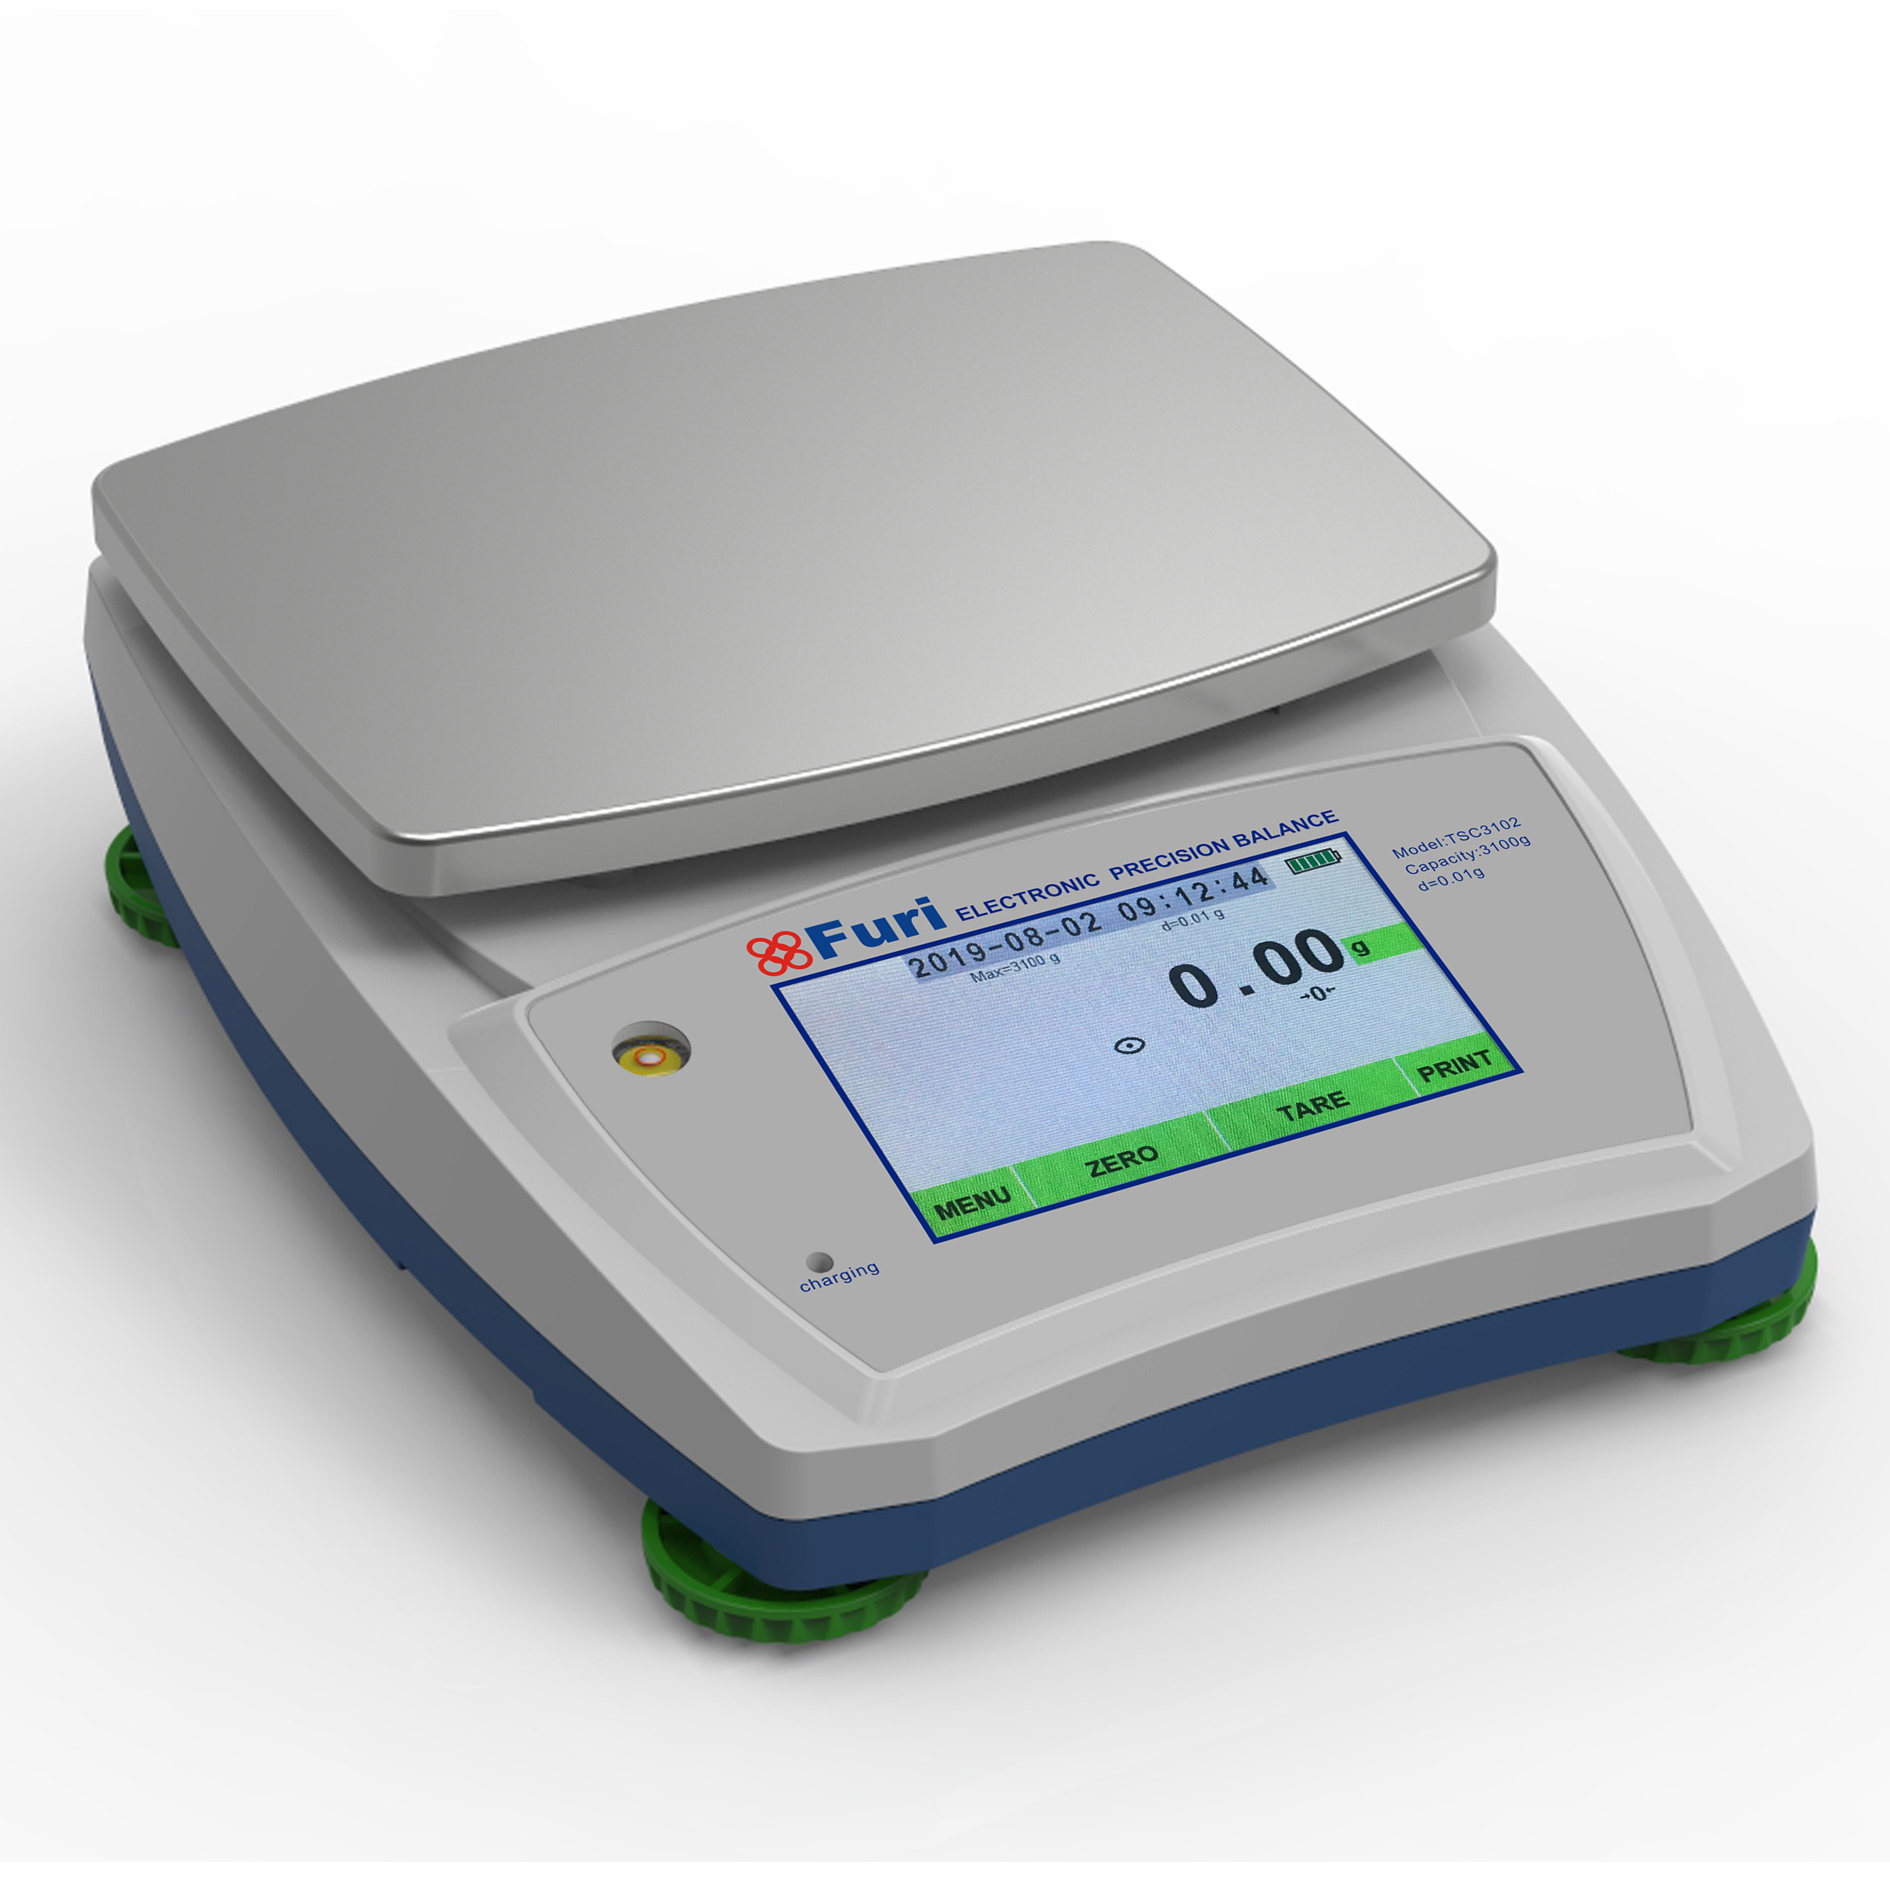 TB touch screen balance with density measuring function